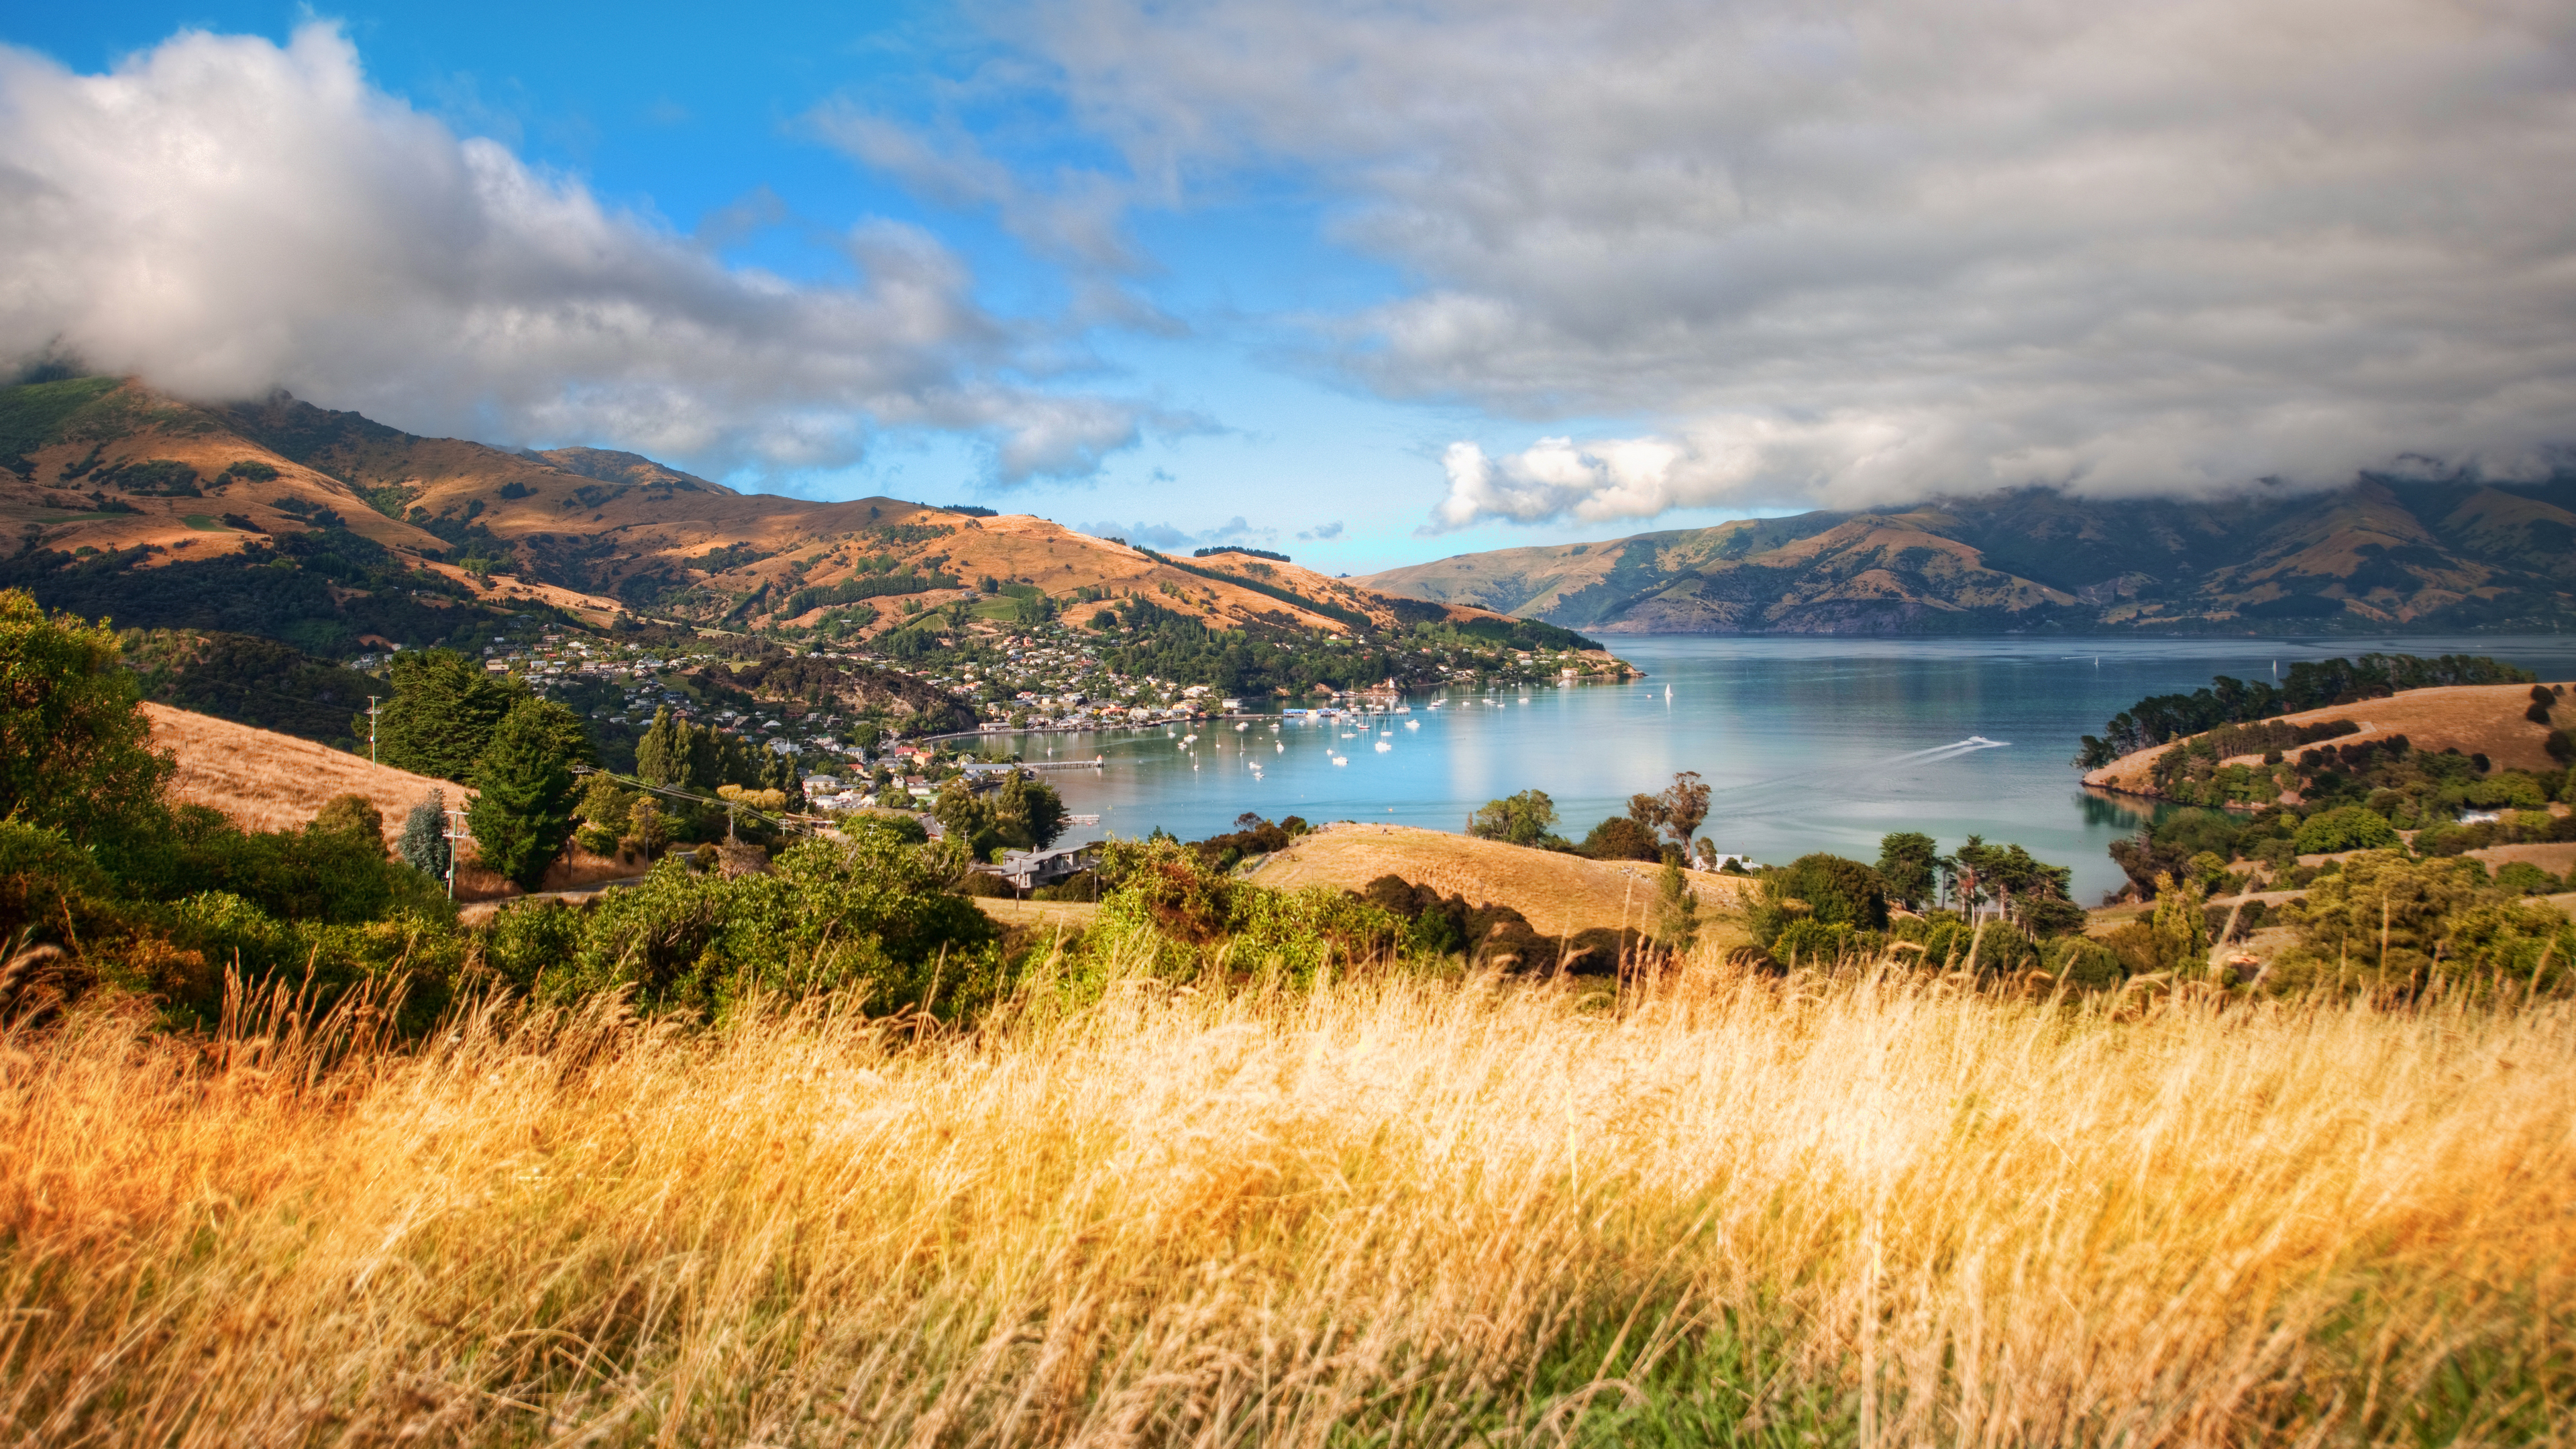 General 3840x2160 Trey Ratcliff photography New Zealand Akaroa landscape nature water boat mountains hills house trees field clouds bay sky